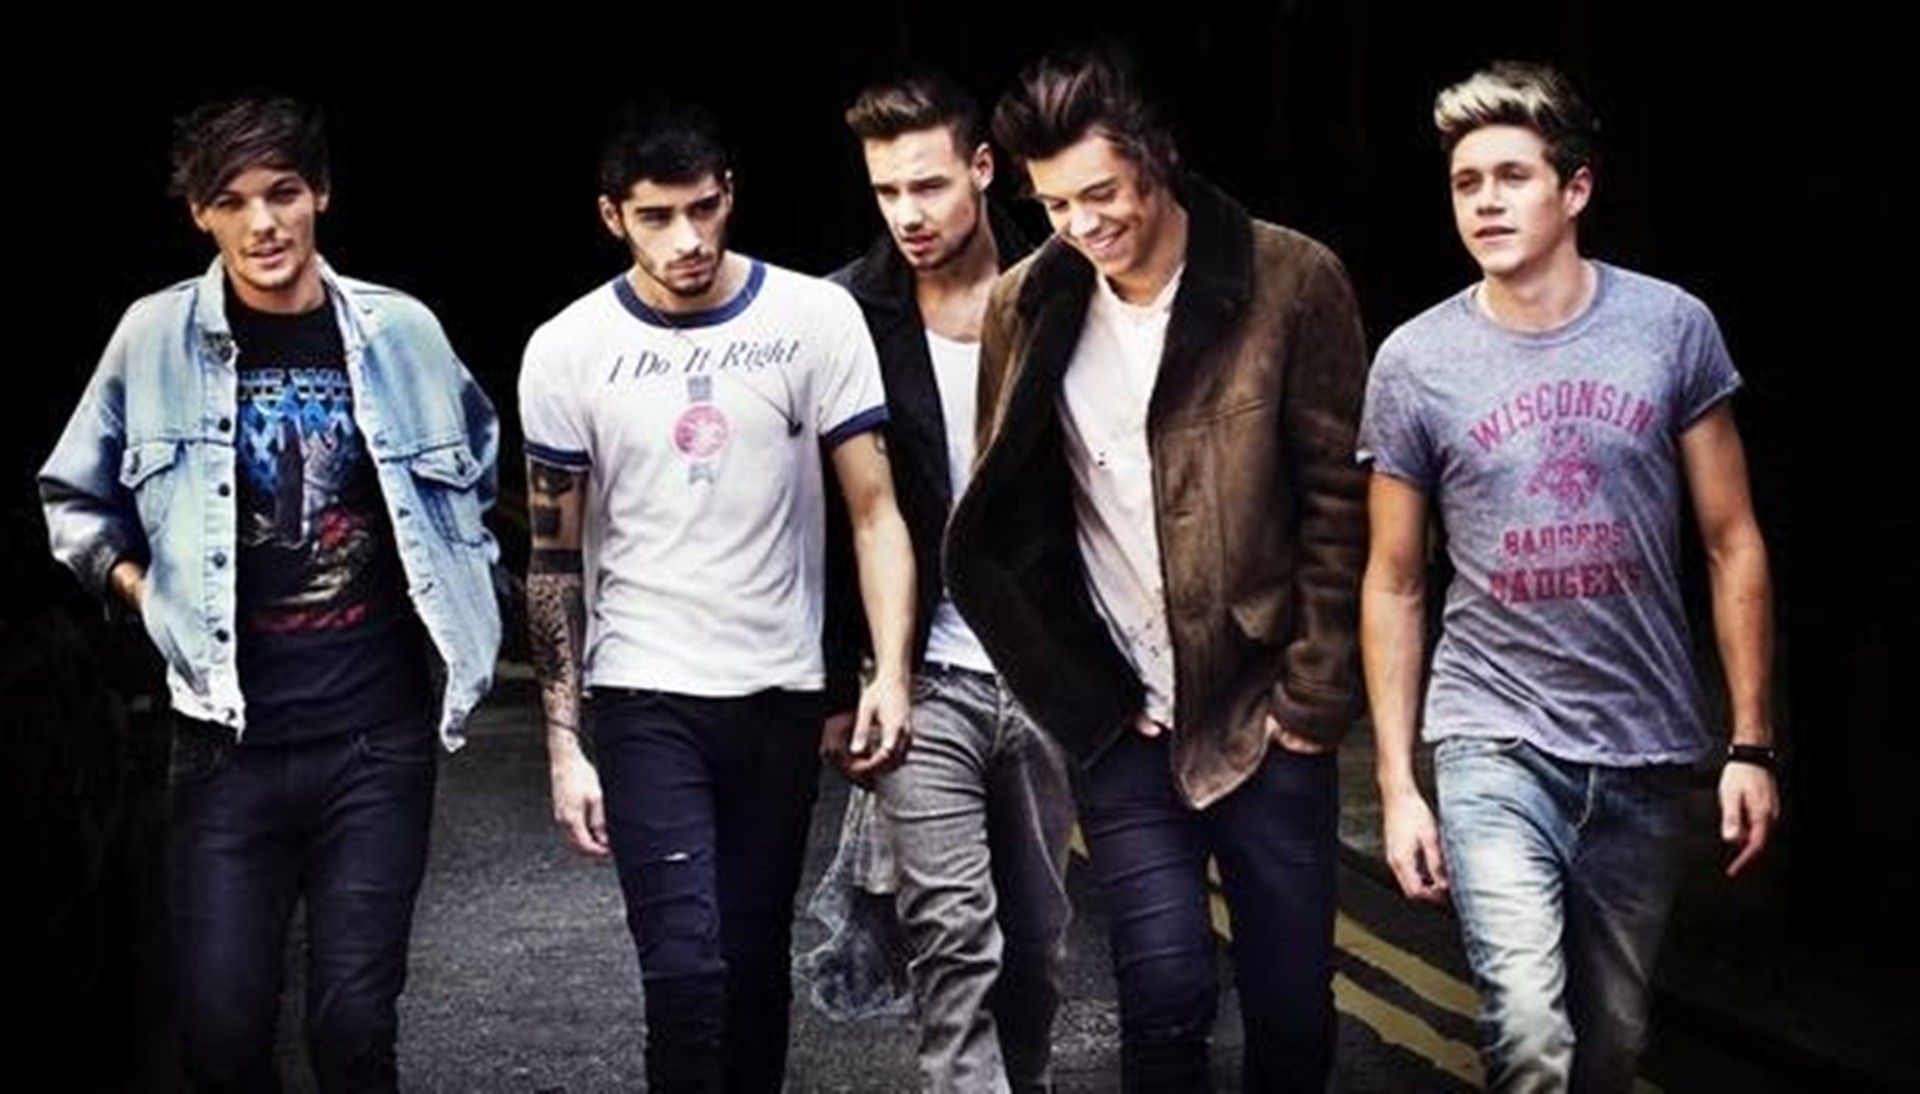 1920x1094  One Direction Live Wallpaper For Computer Free Download. wallpaper  .